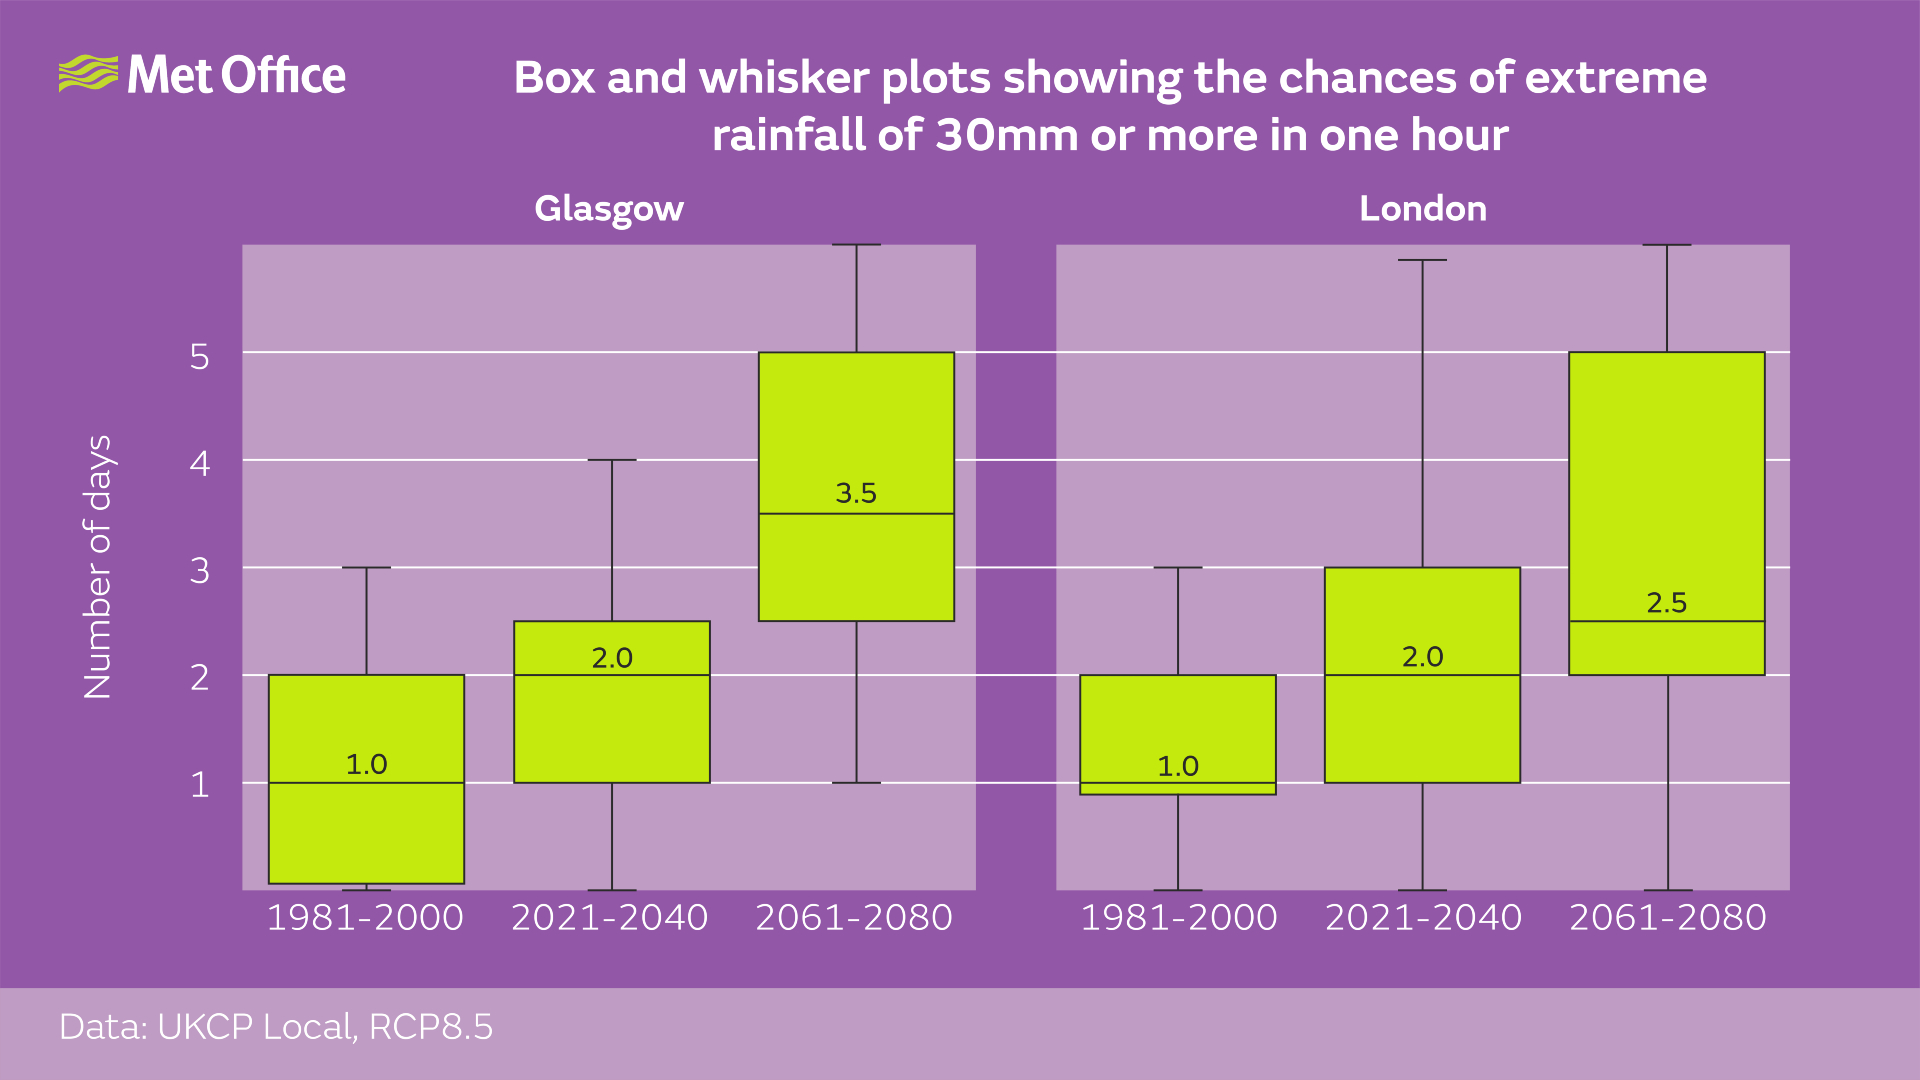 Box and whisker plot showing chances of 30mm/hr rainfall under a high emissions scenario